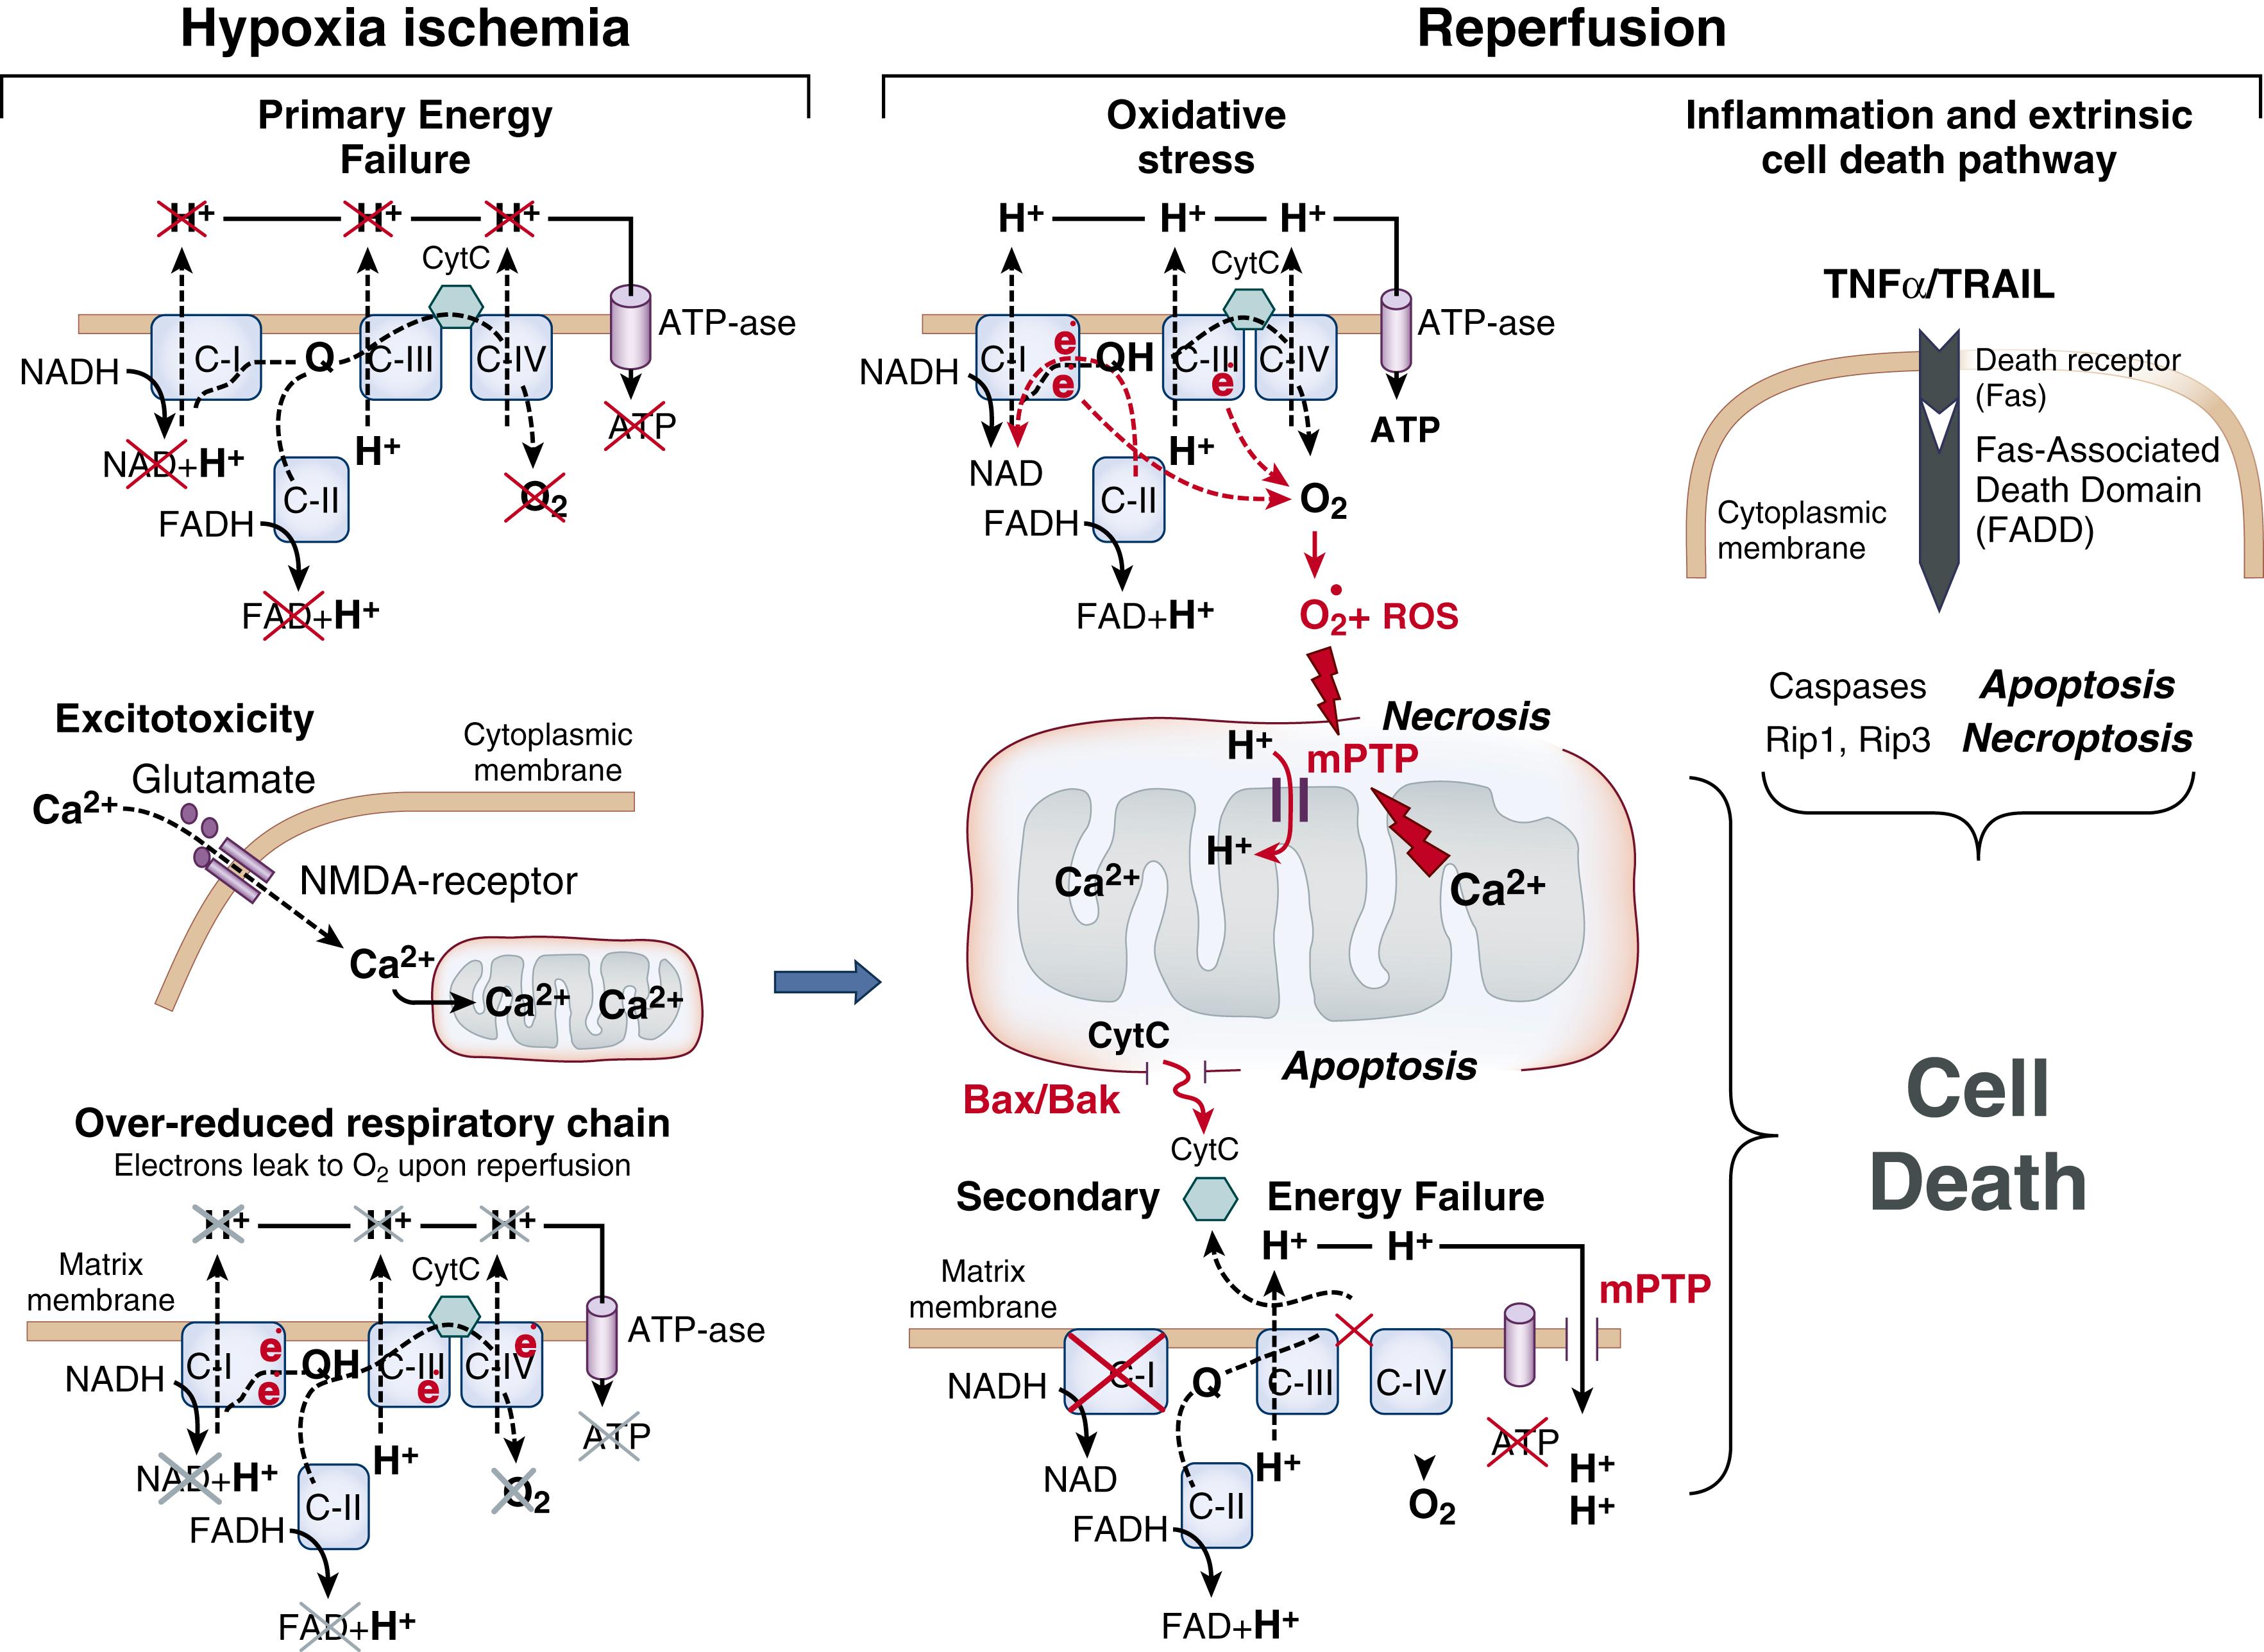 Fig. 167.2, The diagram of major events connecting proposed mechanisms of cellular death during neonatal hypoxia ischemia and reperfusion. ATP , Adenosine triphosphate; FADH , flavin adenine dinucleotide + 2H + ; mPTP , mitochondrial permeability transition pore; NADH , nicotinamide adenine dinucleotide + H + ; NMDA , N -methyl- D -aspartate; ROS , reactive oxygen species.